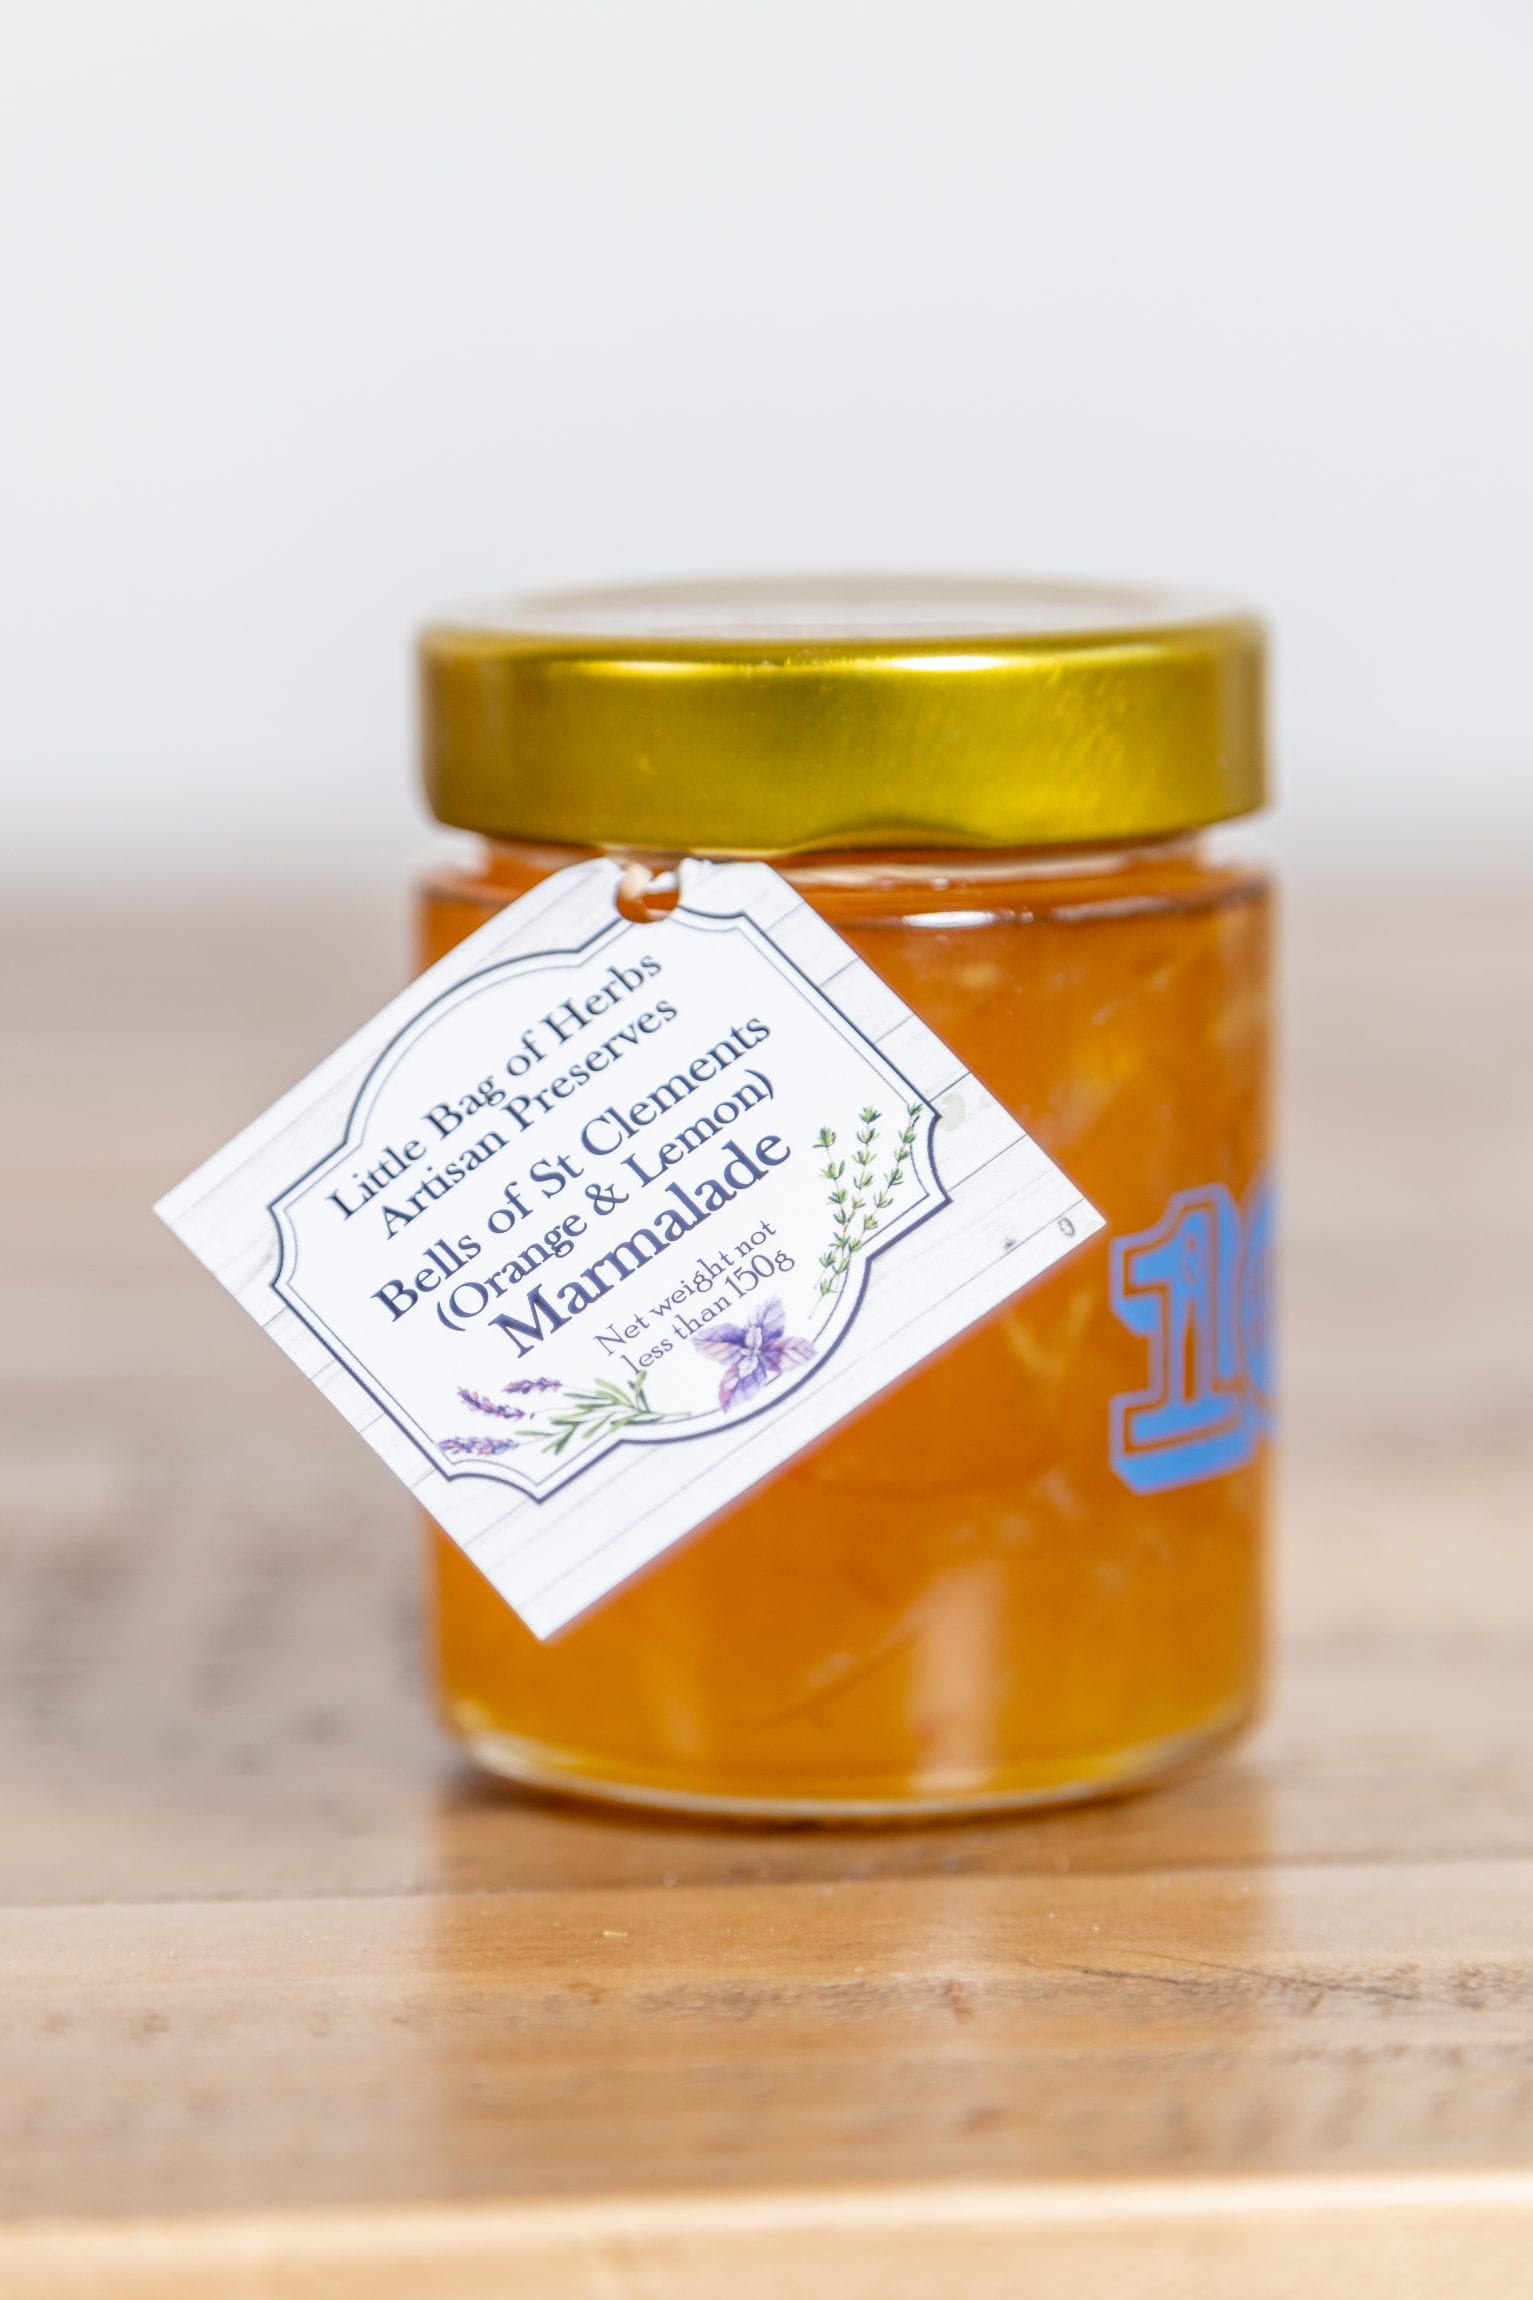 Marmalade of the Month